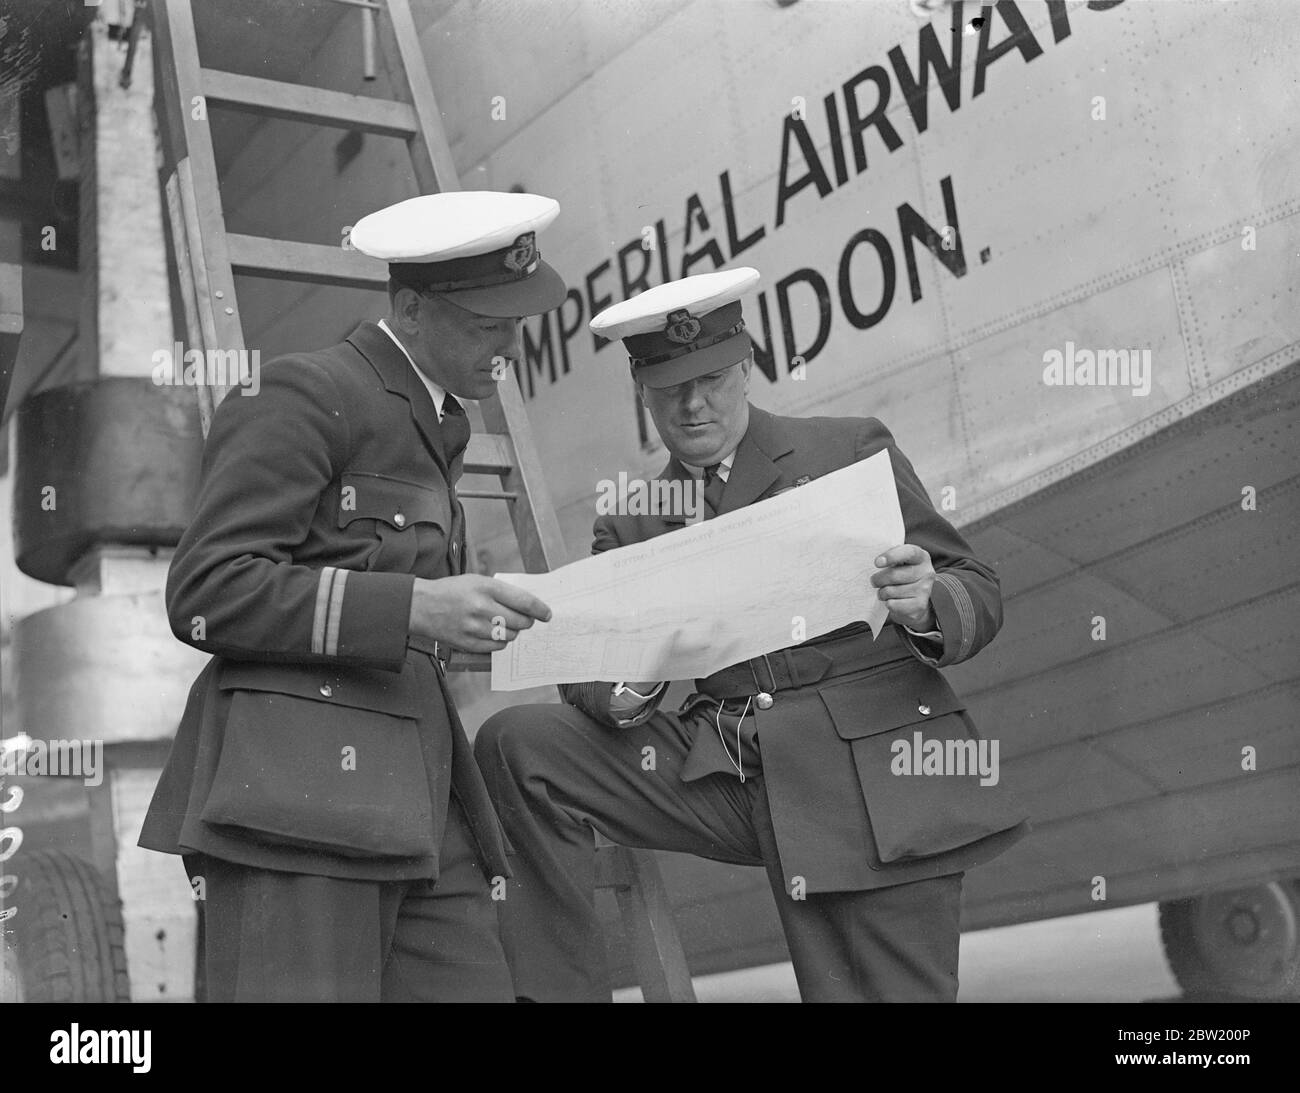 Captain A. S. Wilcockson (right) and First Officer G. H. Bowes studying the Atlantic route beside Caledonia at Hythe, Southampton in readiness for the first experimental commercial transatlantic crossing to be made by the flying boat Caledonia next week (June 24). 18 June 1937 Stock Photo